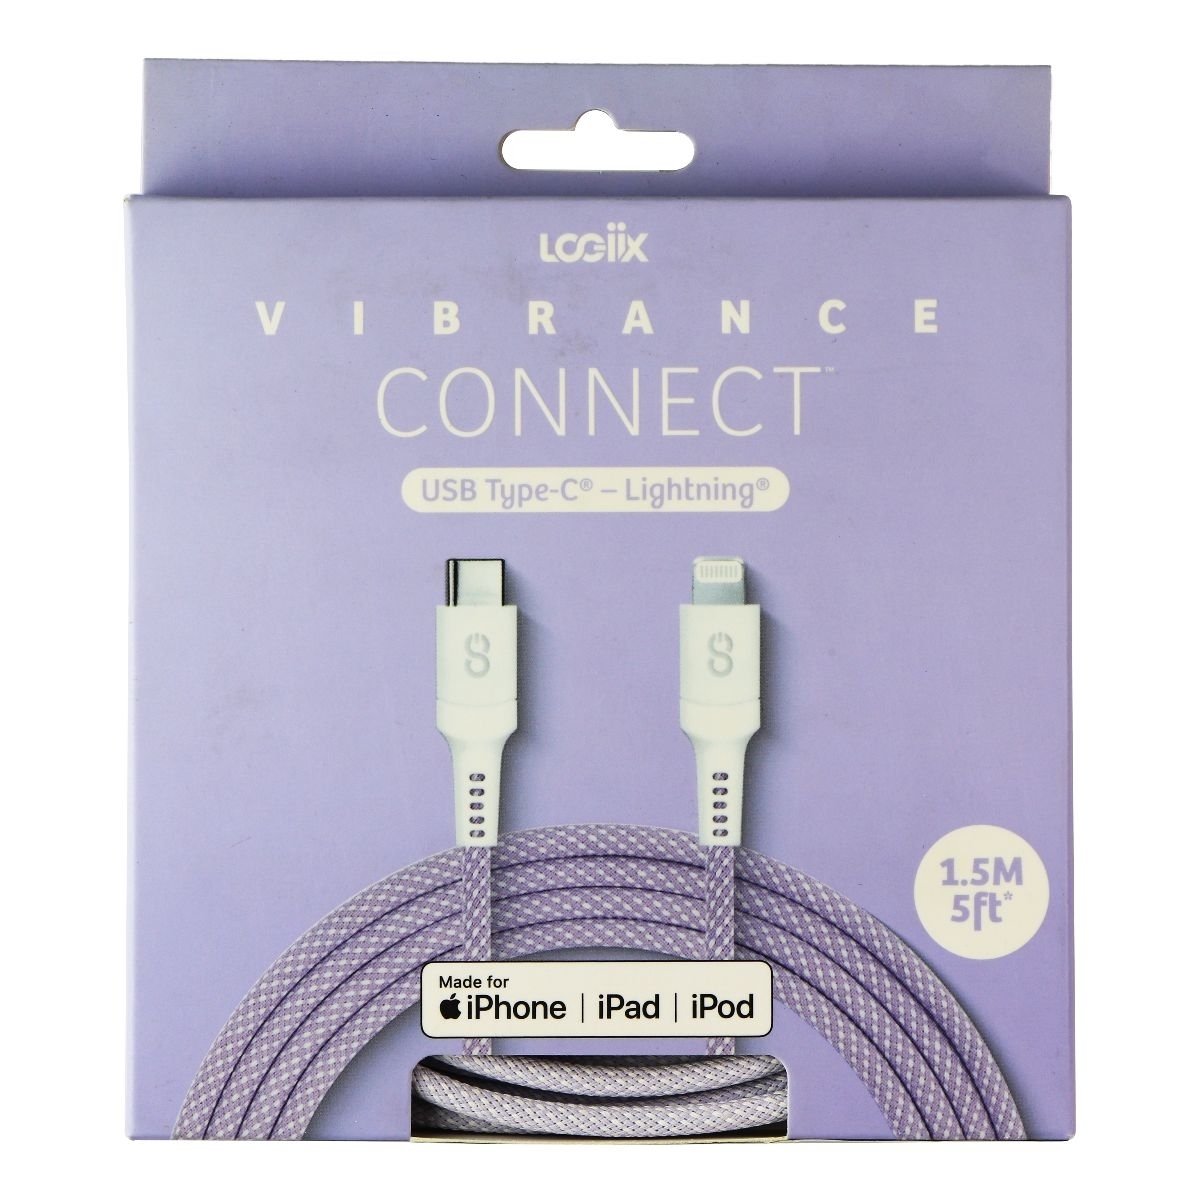 Logiix Vibrance Connect (5-ft) USB-C Type C To Lightning 8-Pin Cable - Purple (Refurbished)